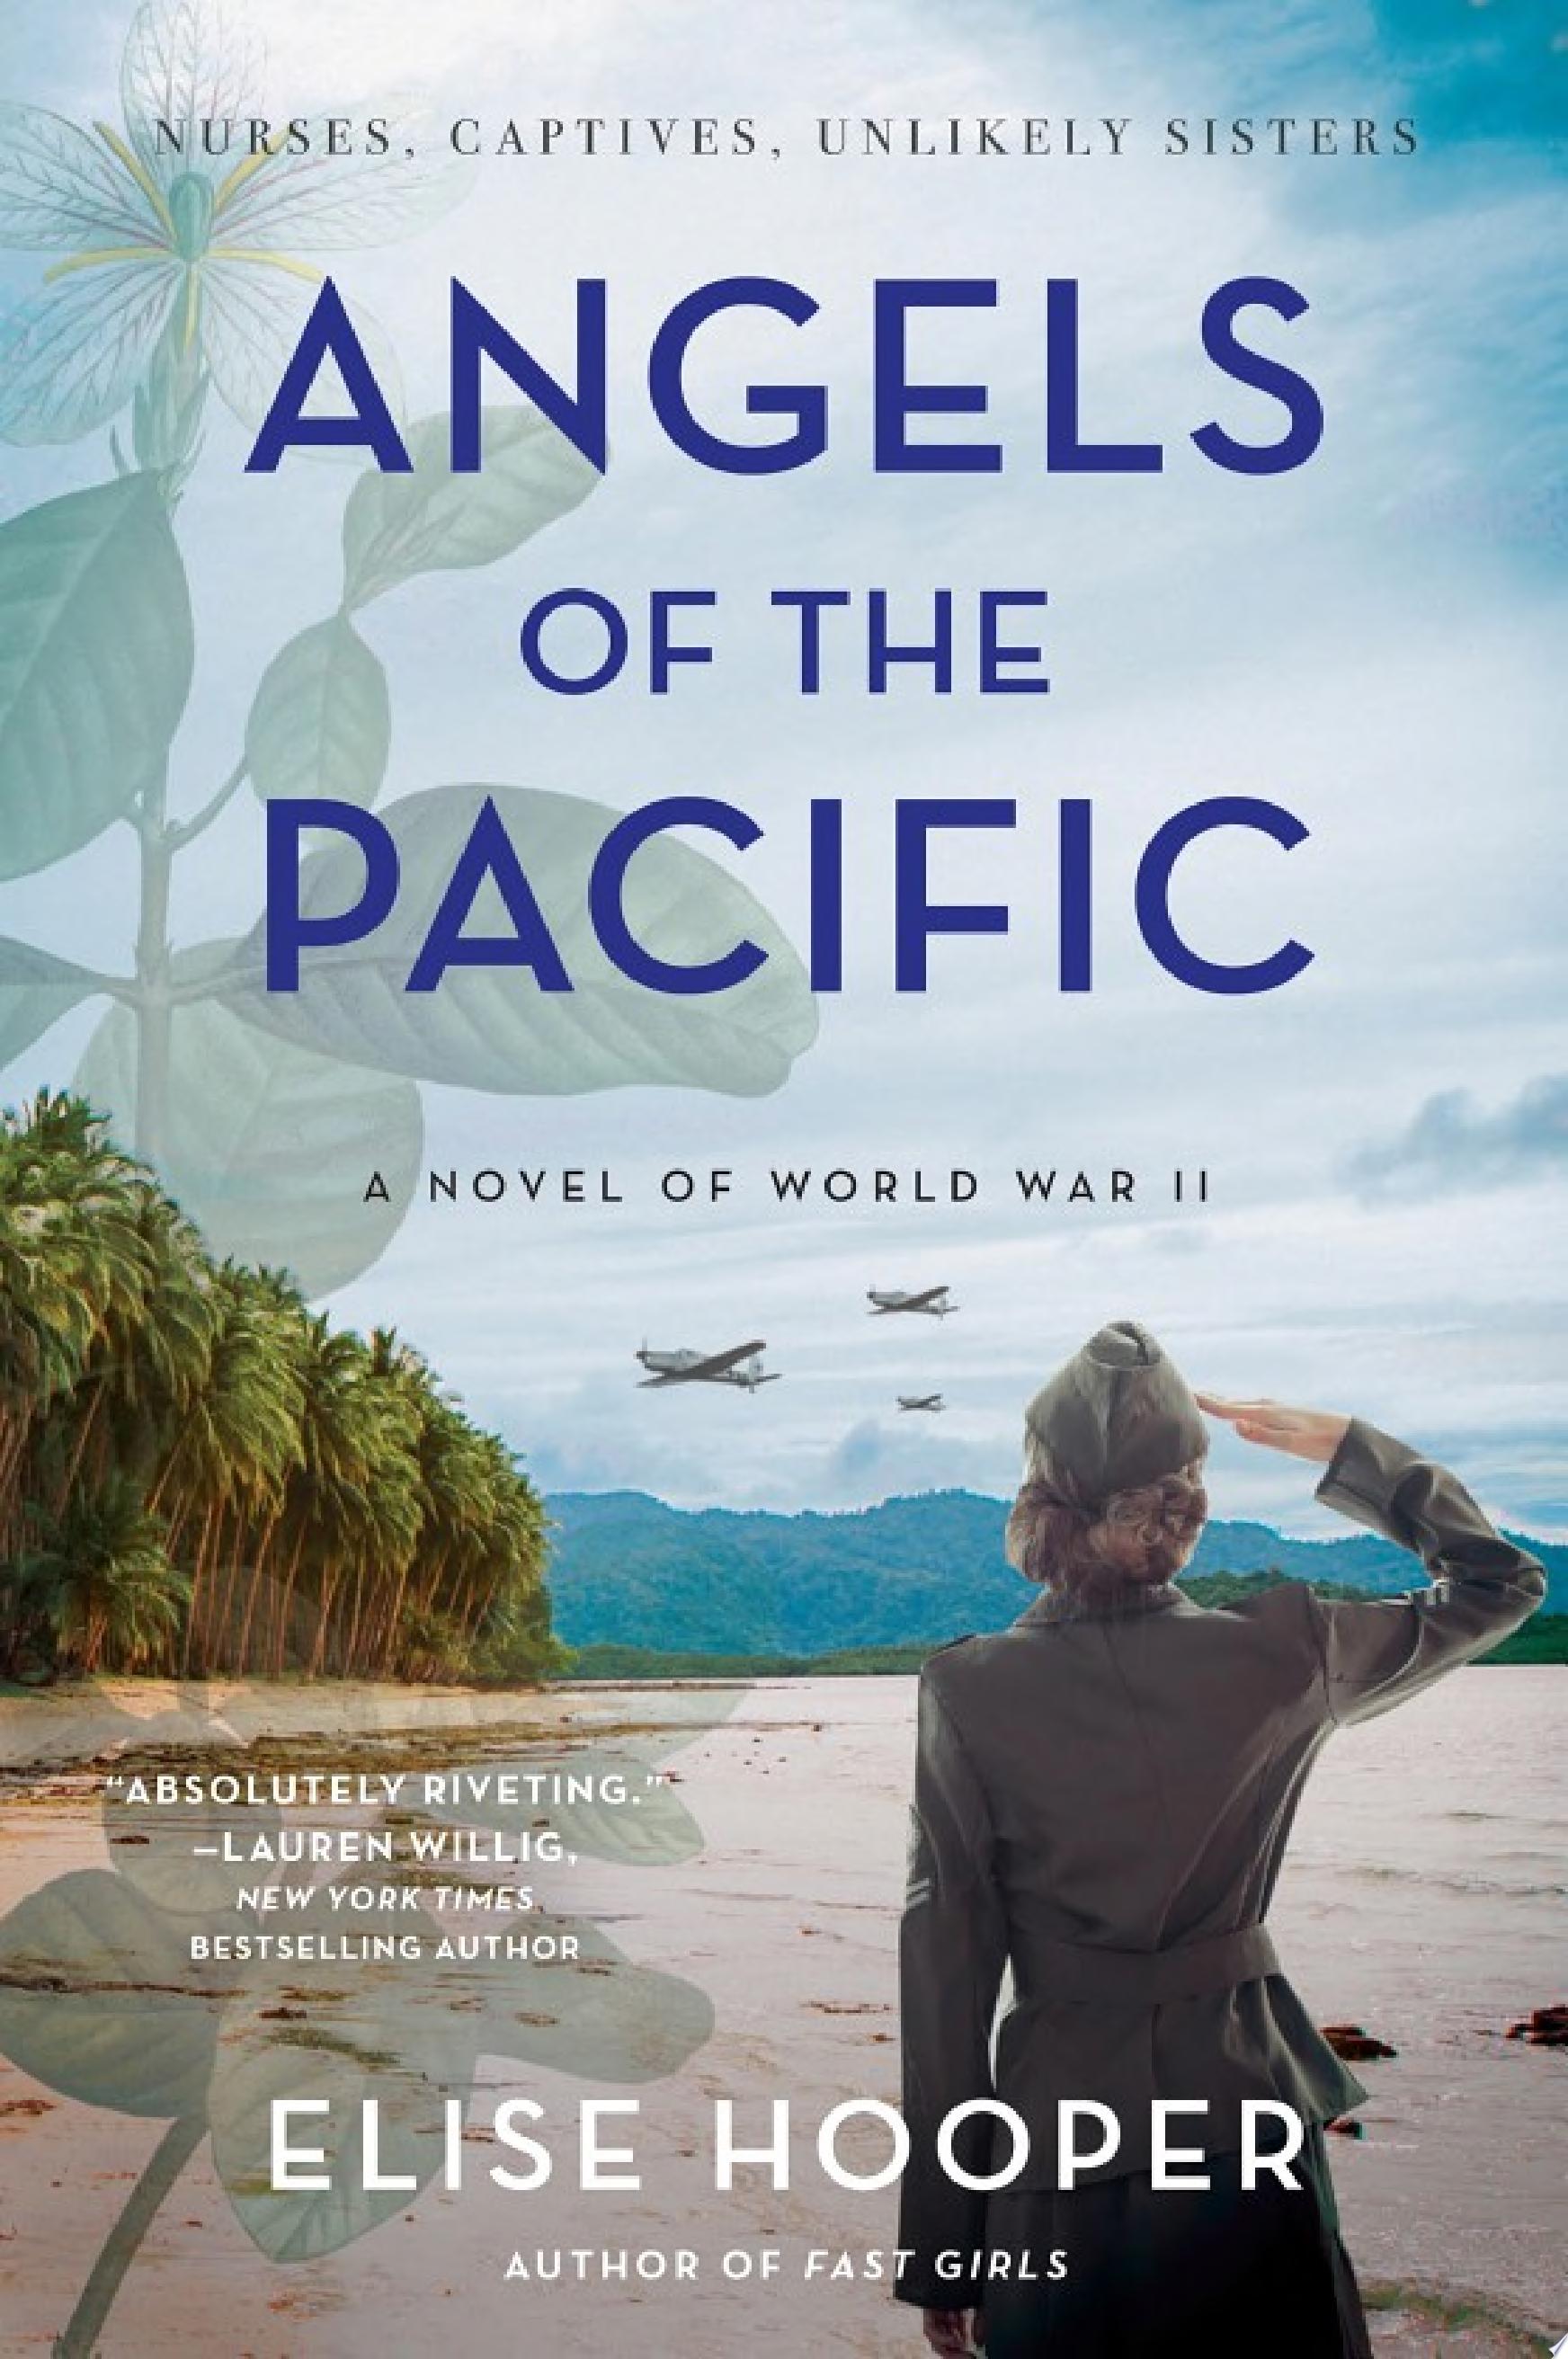 Image for "Angels of the Pacific"